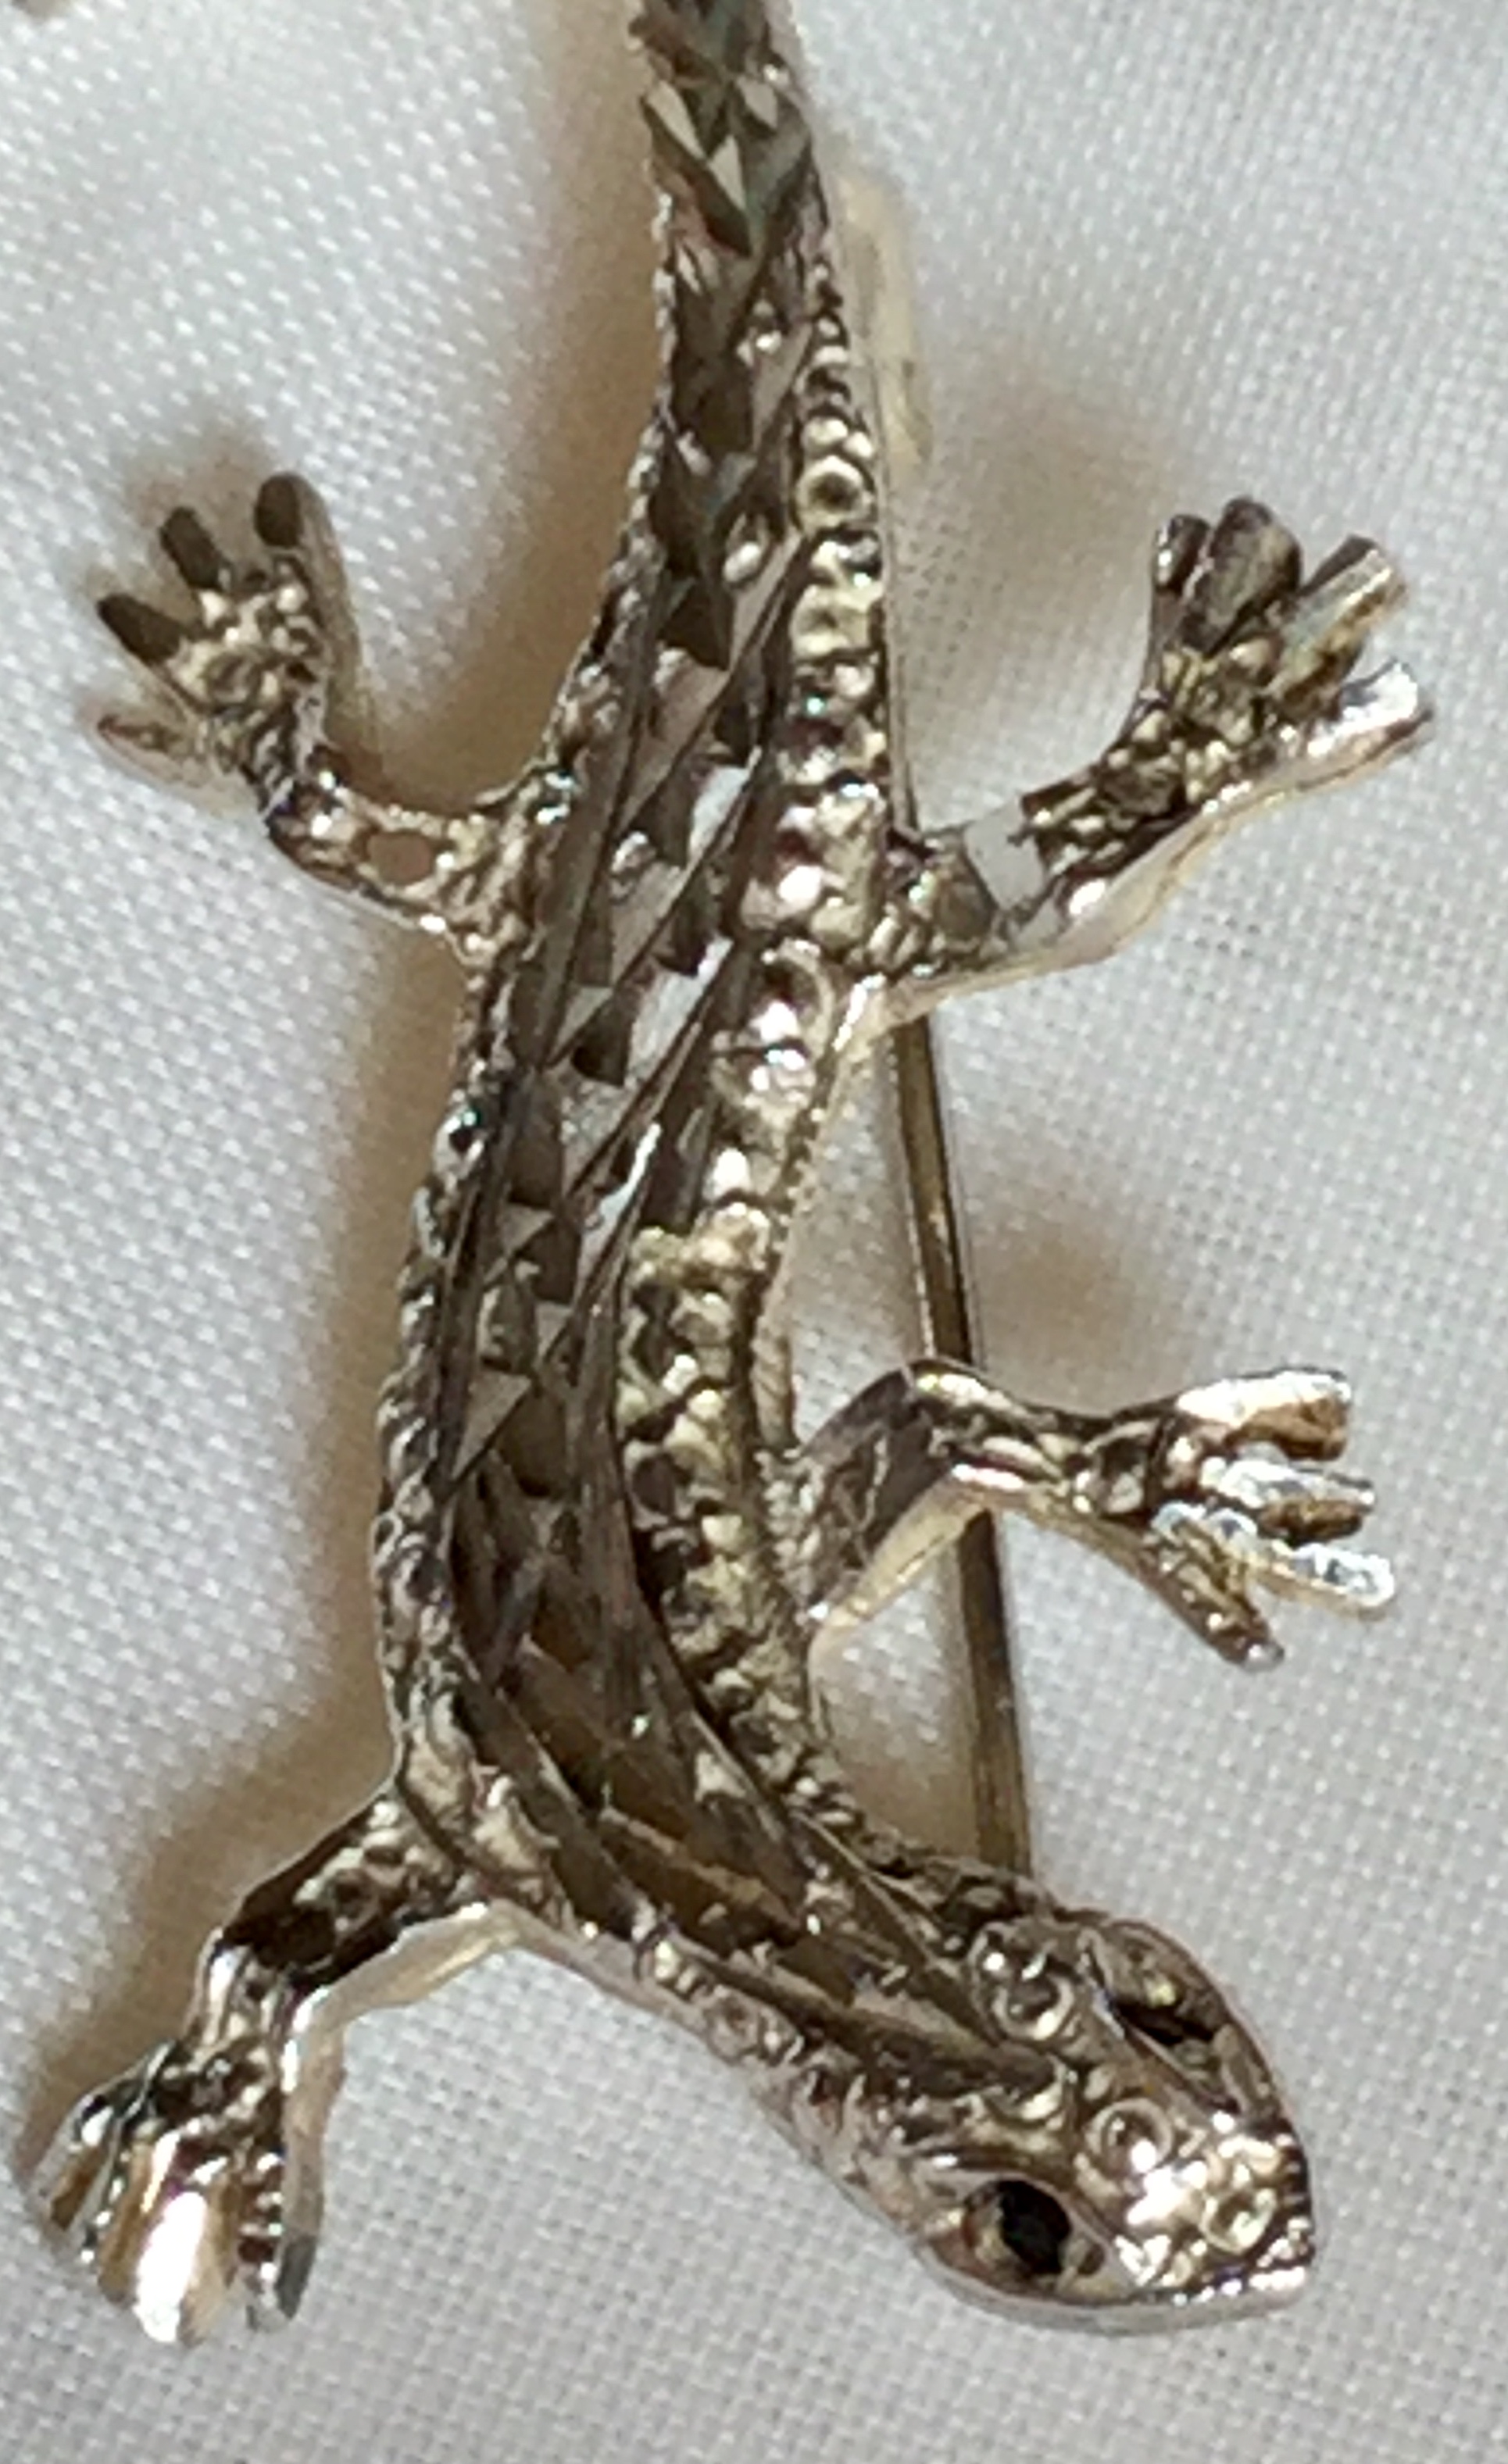 Silver Vintage Lizard Brooch with sparkly onyx eyes 4.10 grams - Image 4 of 7